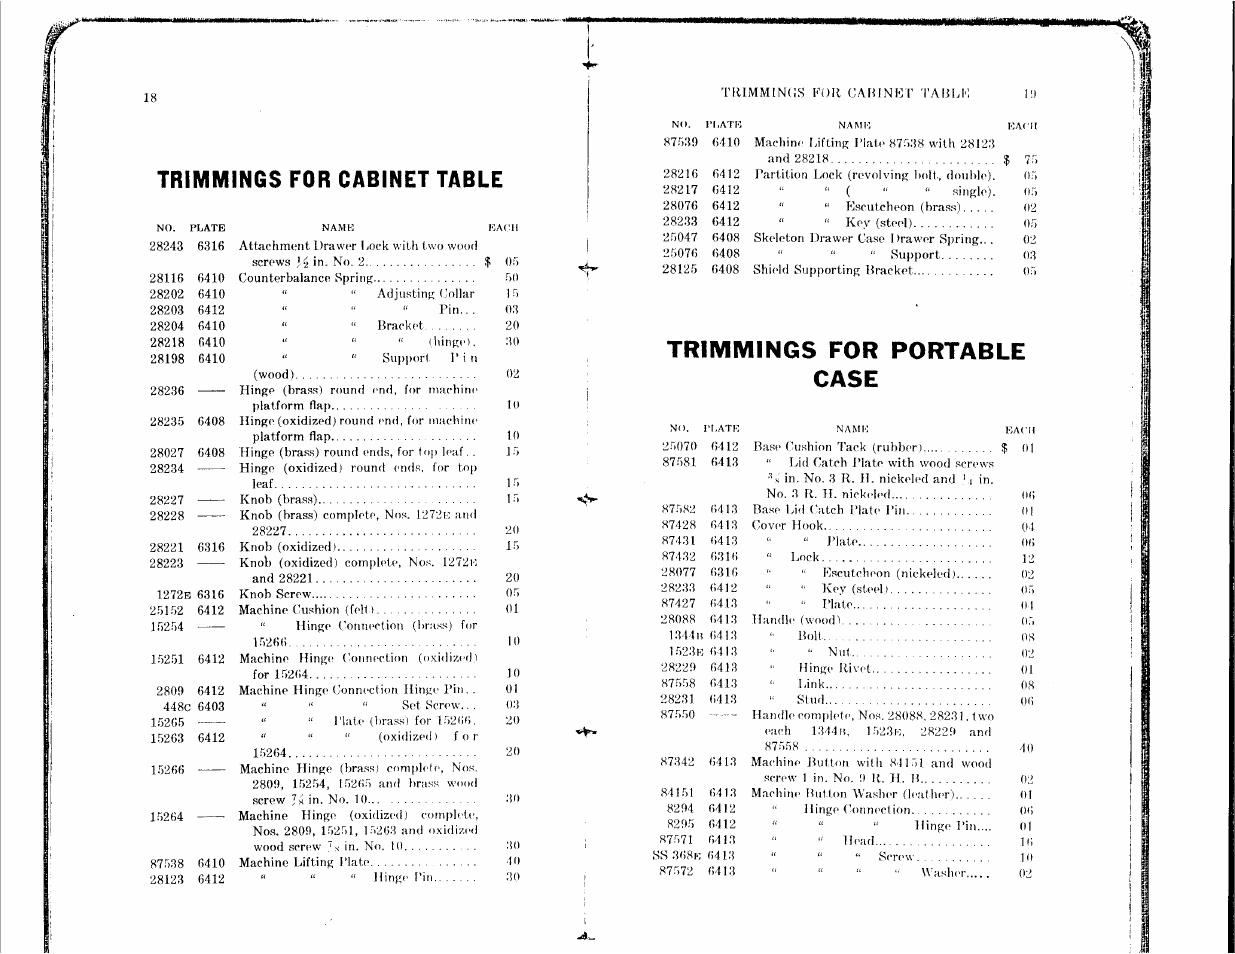 Trimmings for cabinet table, Trimmings for portable case, Rimmings | Abinet, Able | SINGER 128-4 User Manual | Page 9 / 25